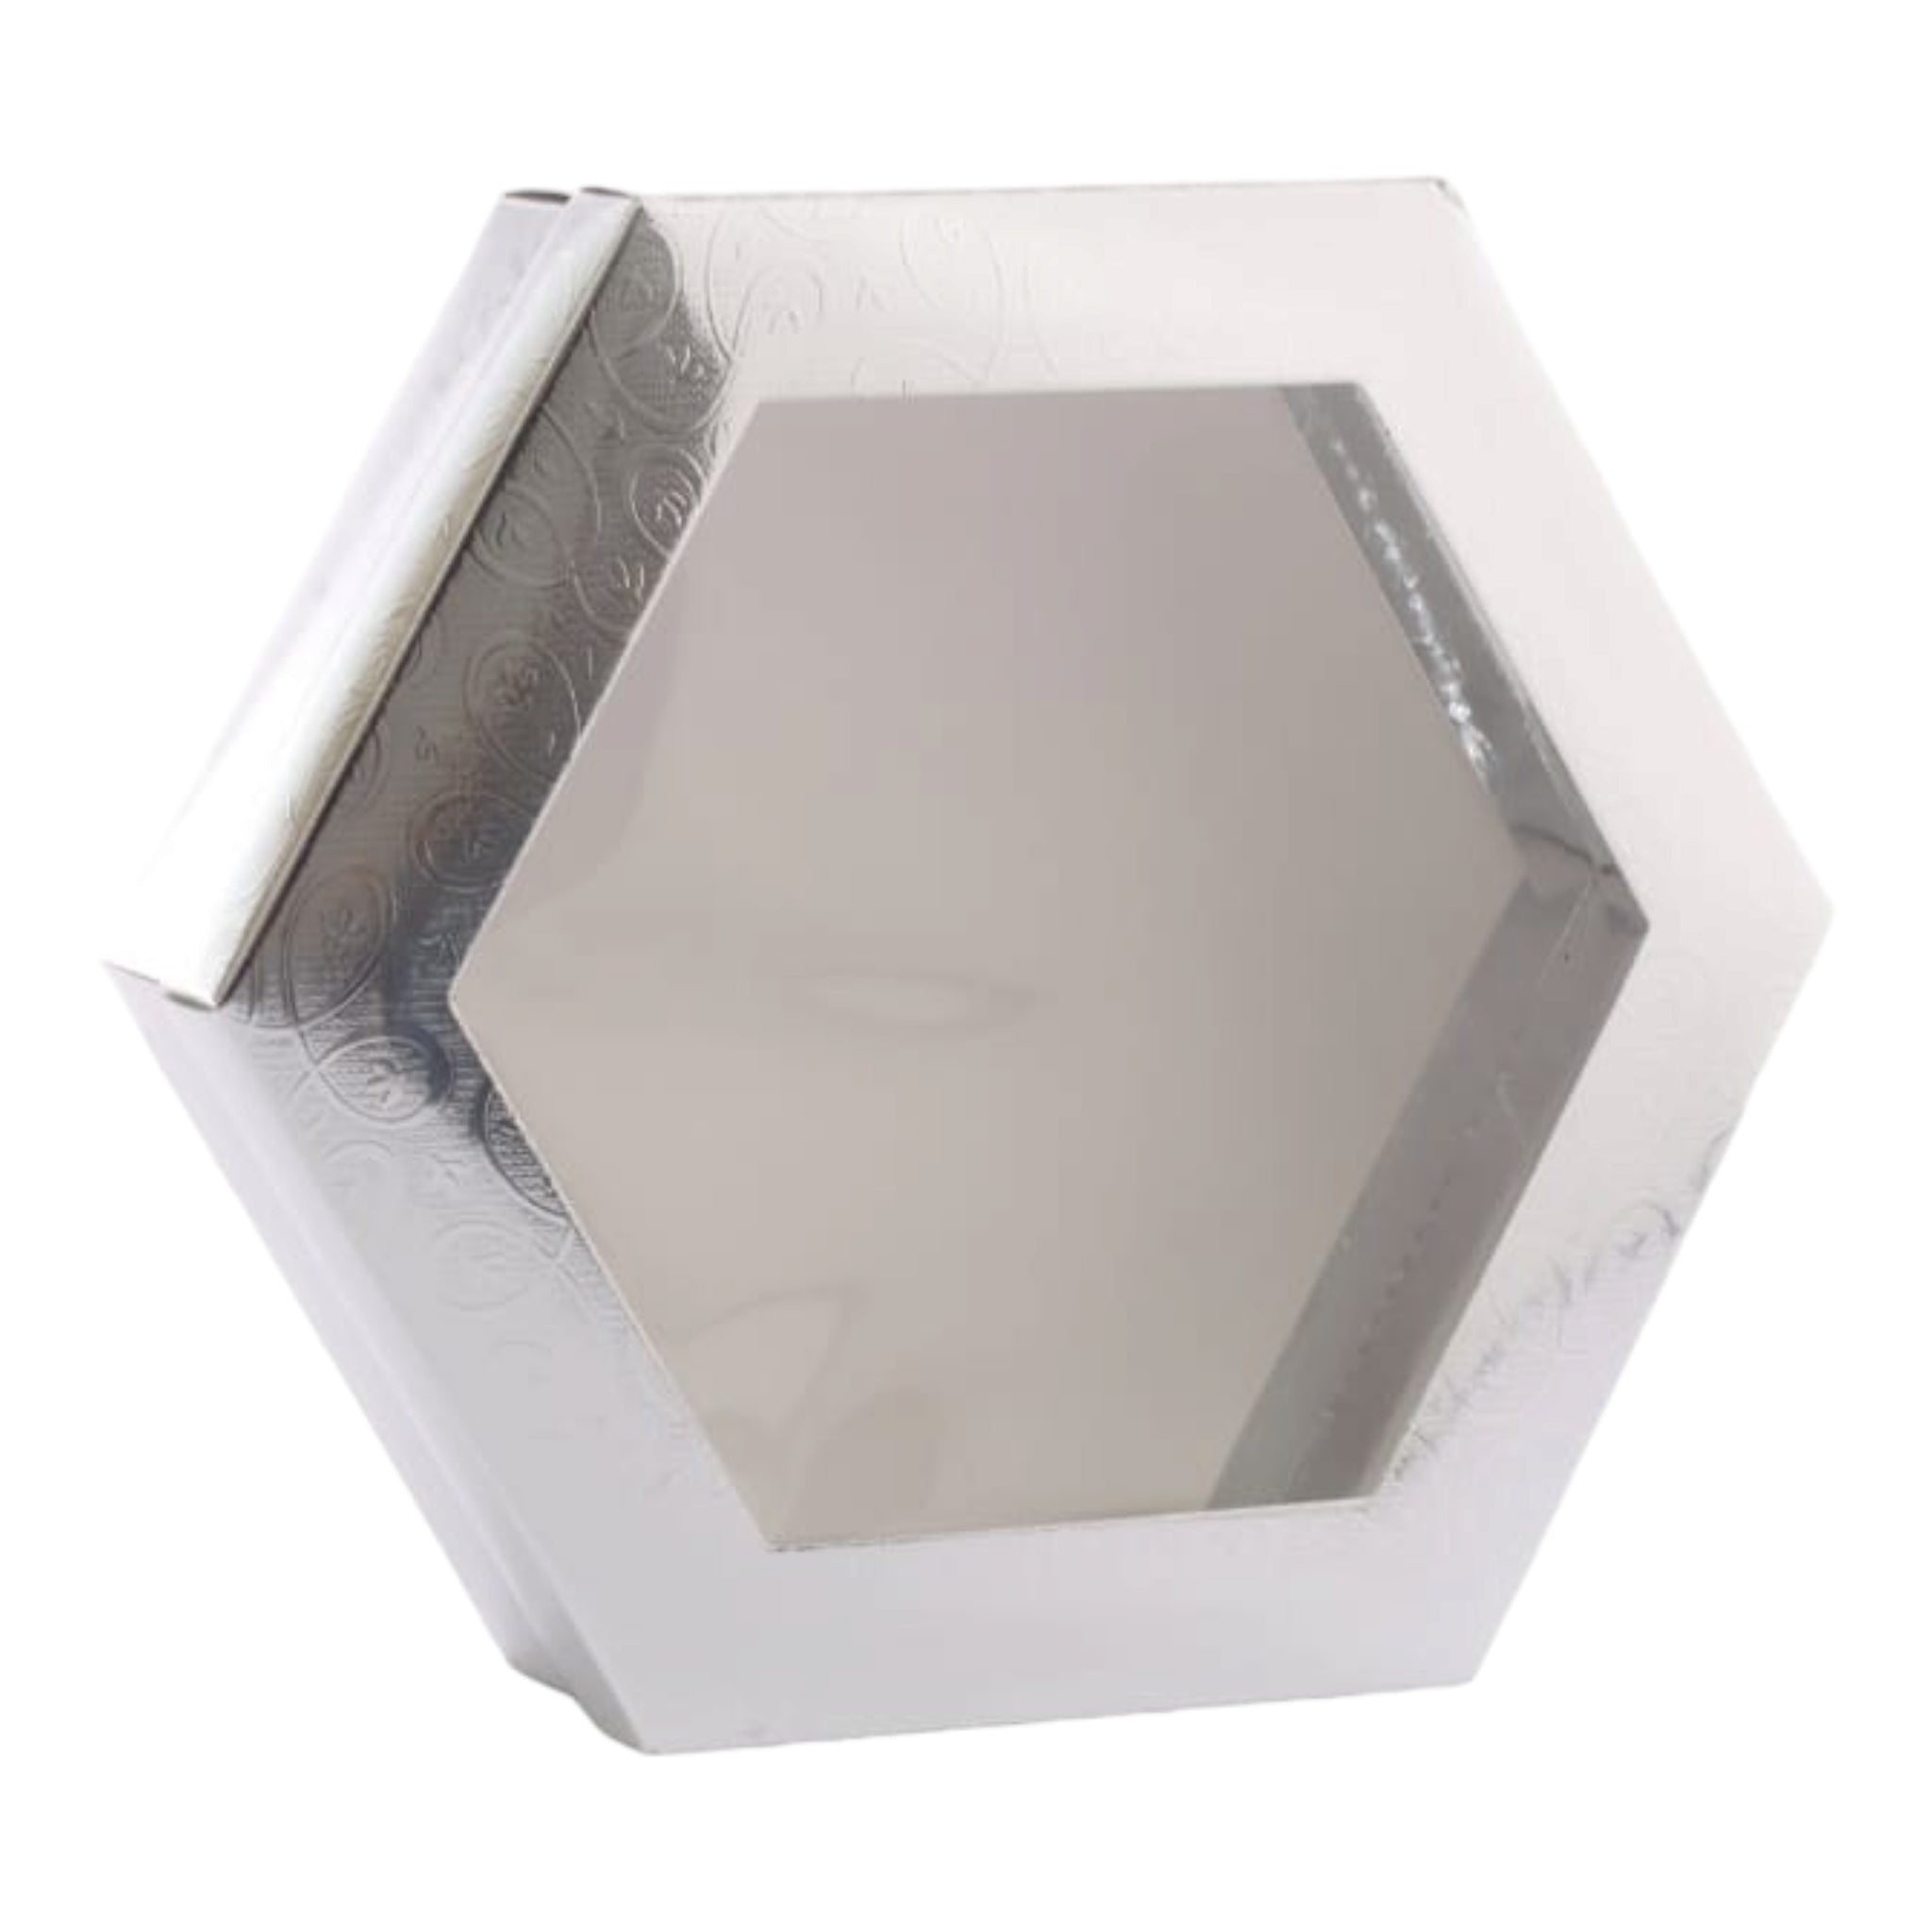 Gift Biscuit Paper Box Hexagon Silver 19x19x5cm Clear Window XPP239-S